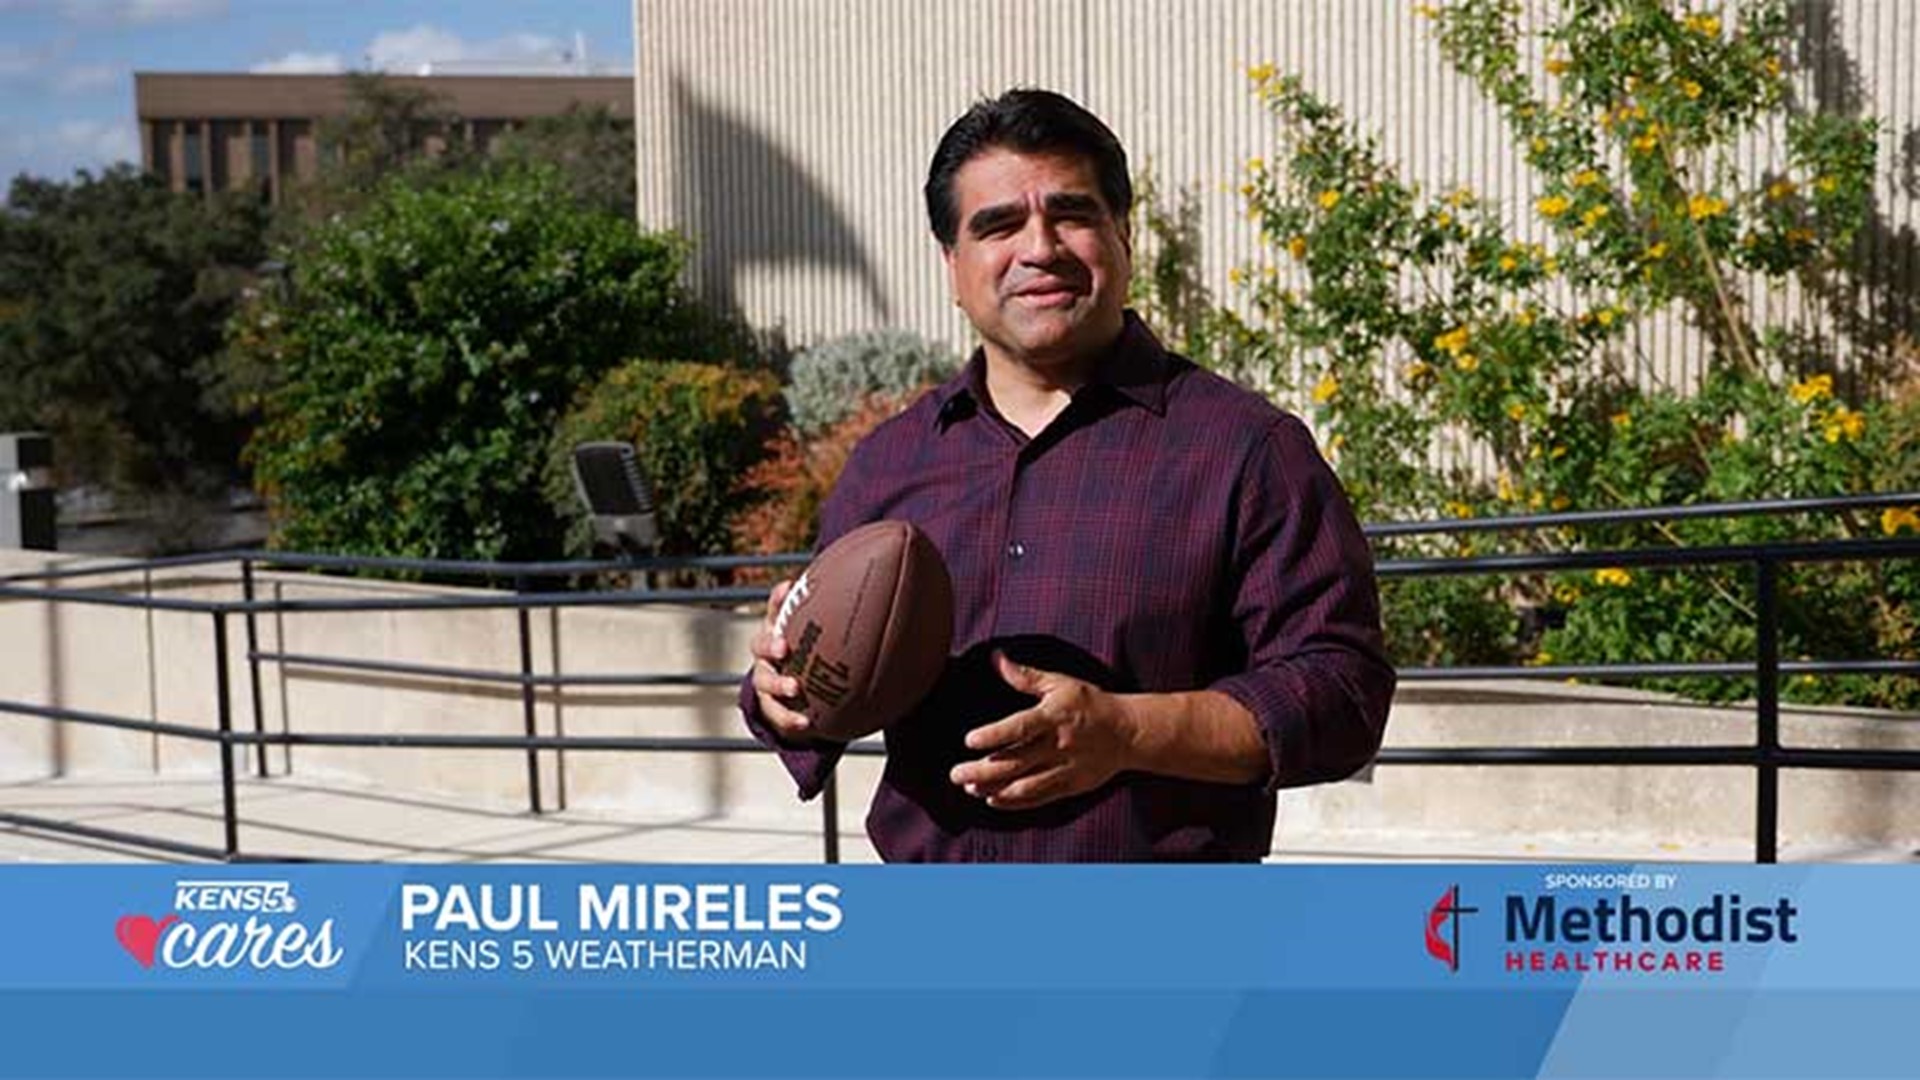 KENS 5's Paul Mireles says one of his favorite toys growing up was a football! You can help create lasting memories for children in need this holiday season.